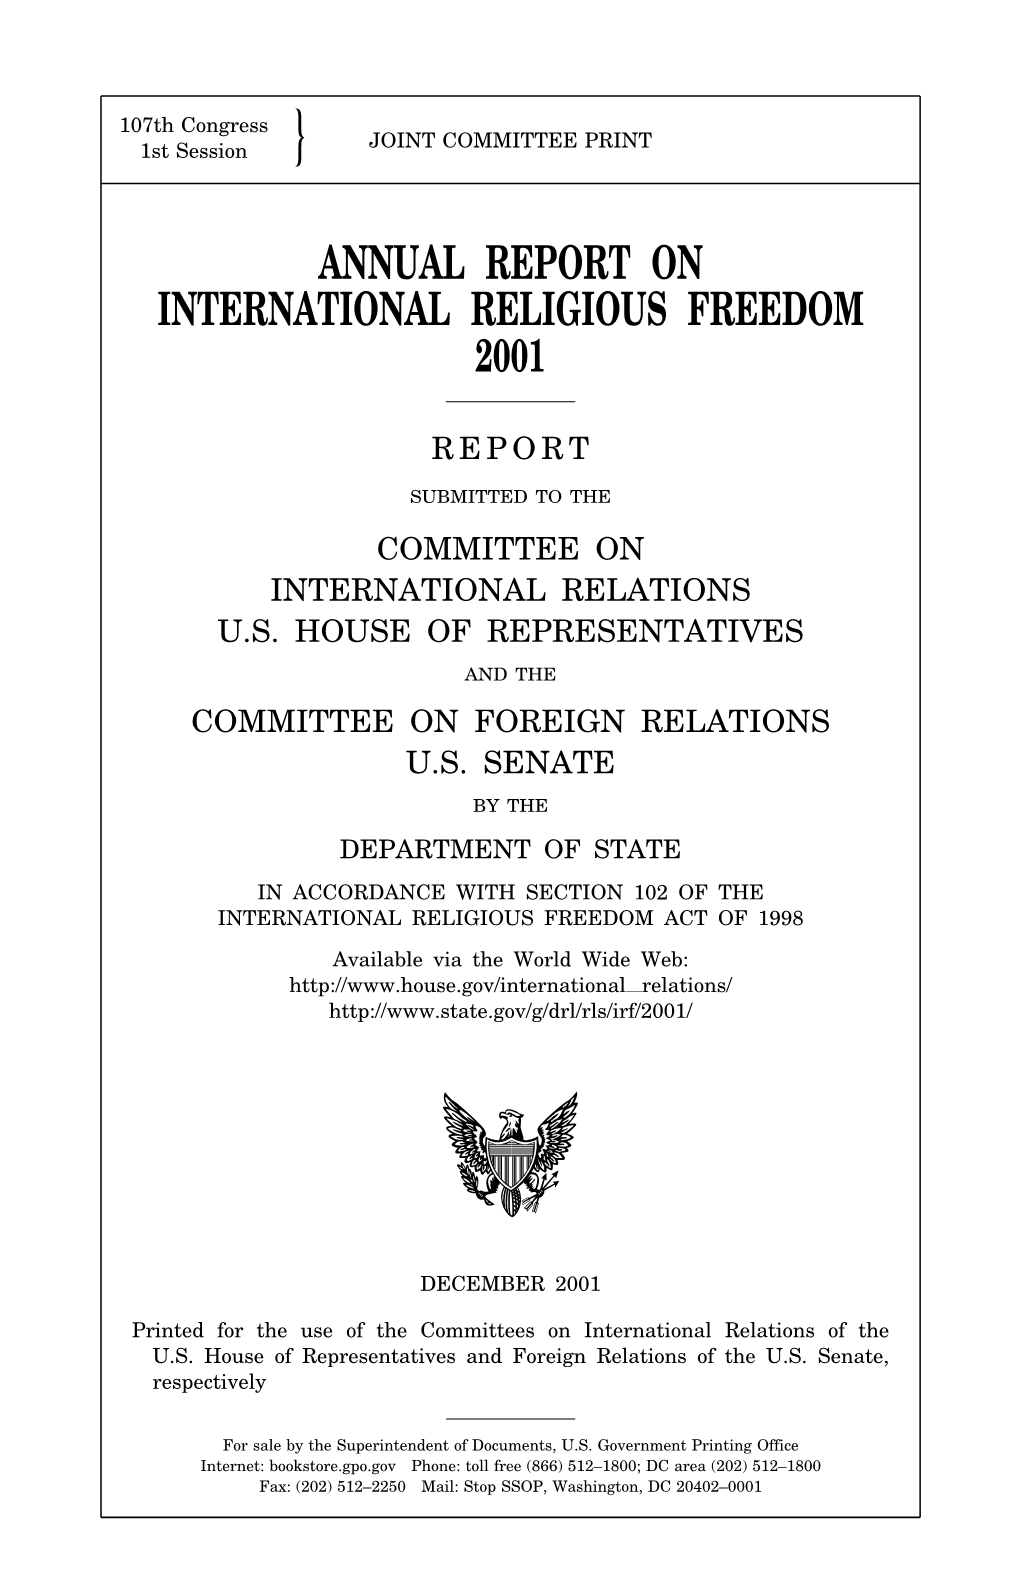 Annual Report on International Religious Freedom 2001